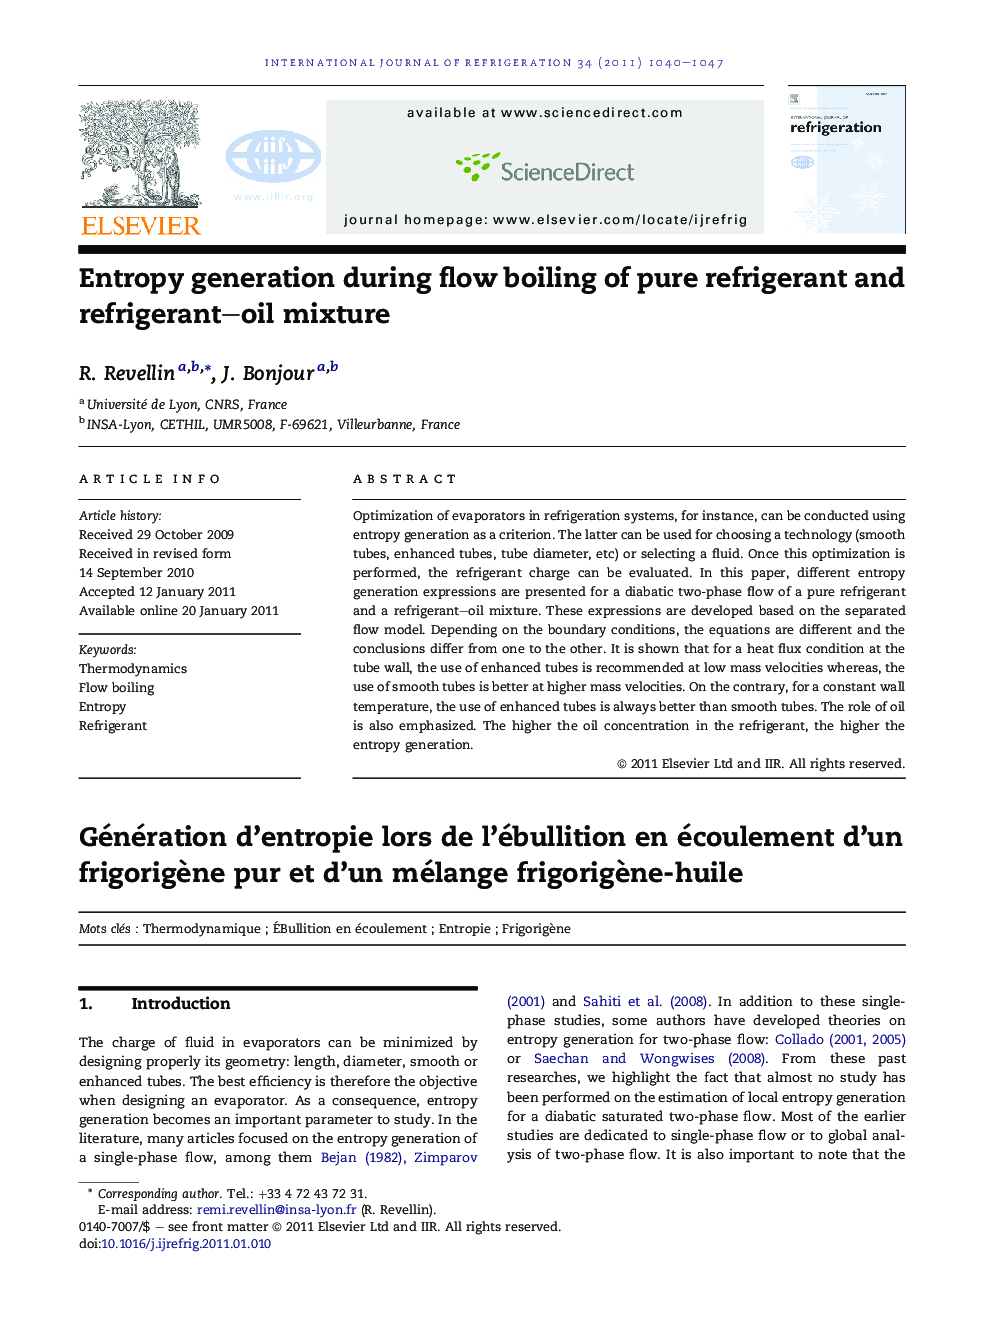 Entropy generation during flow boiling of pure refrigerant and refrigerant–oil mixture